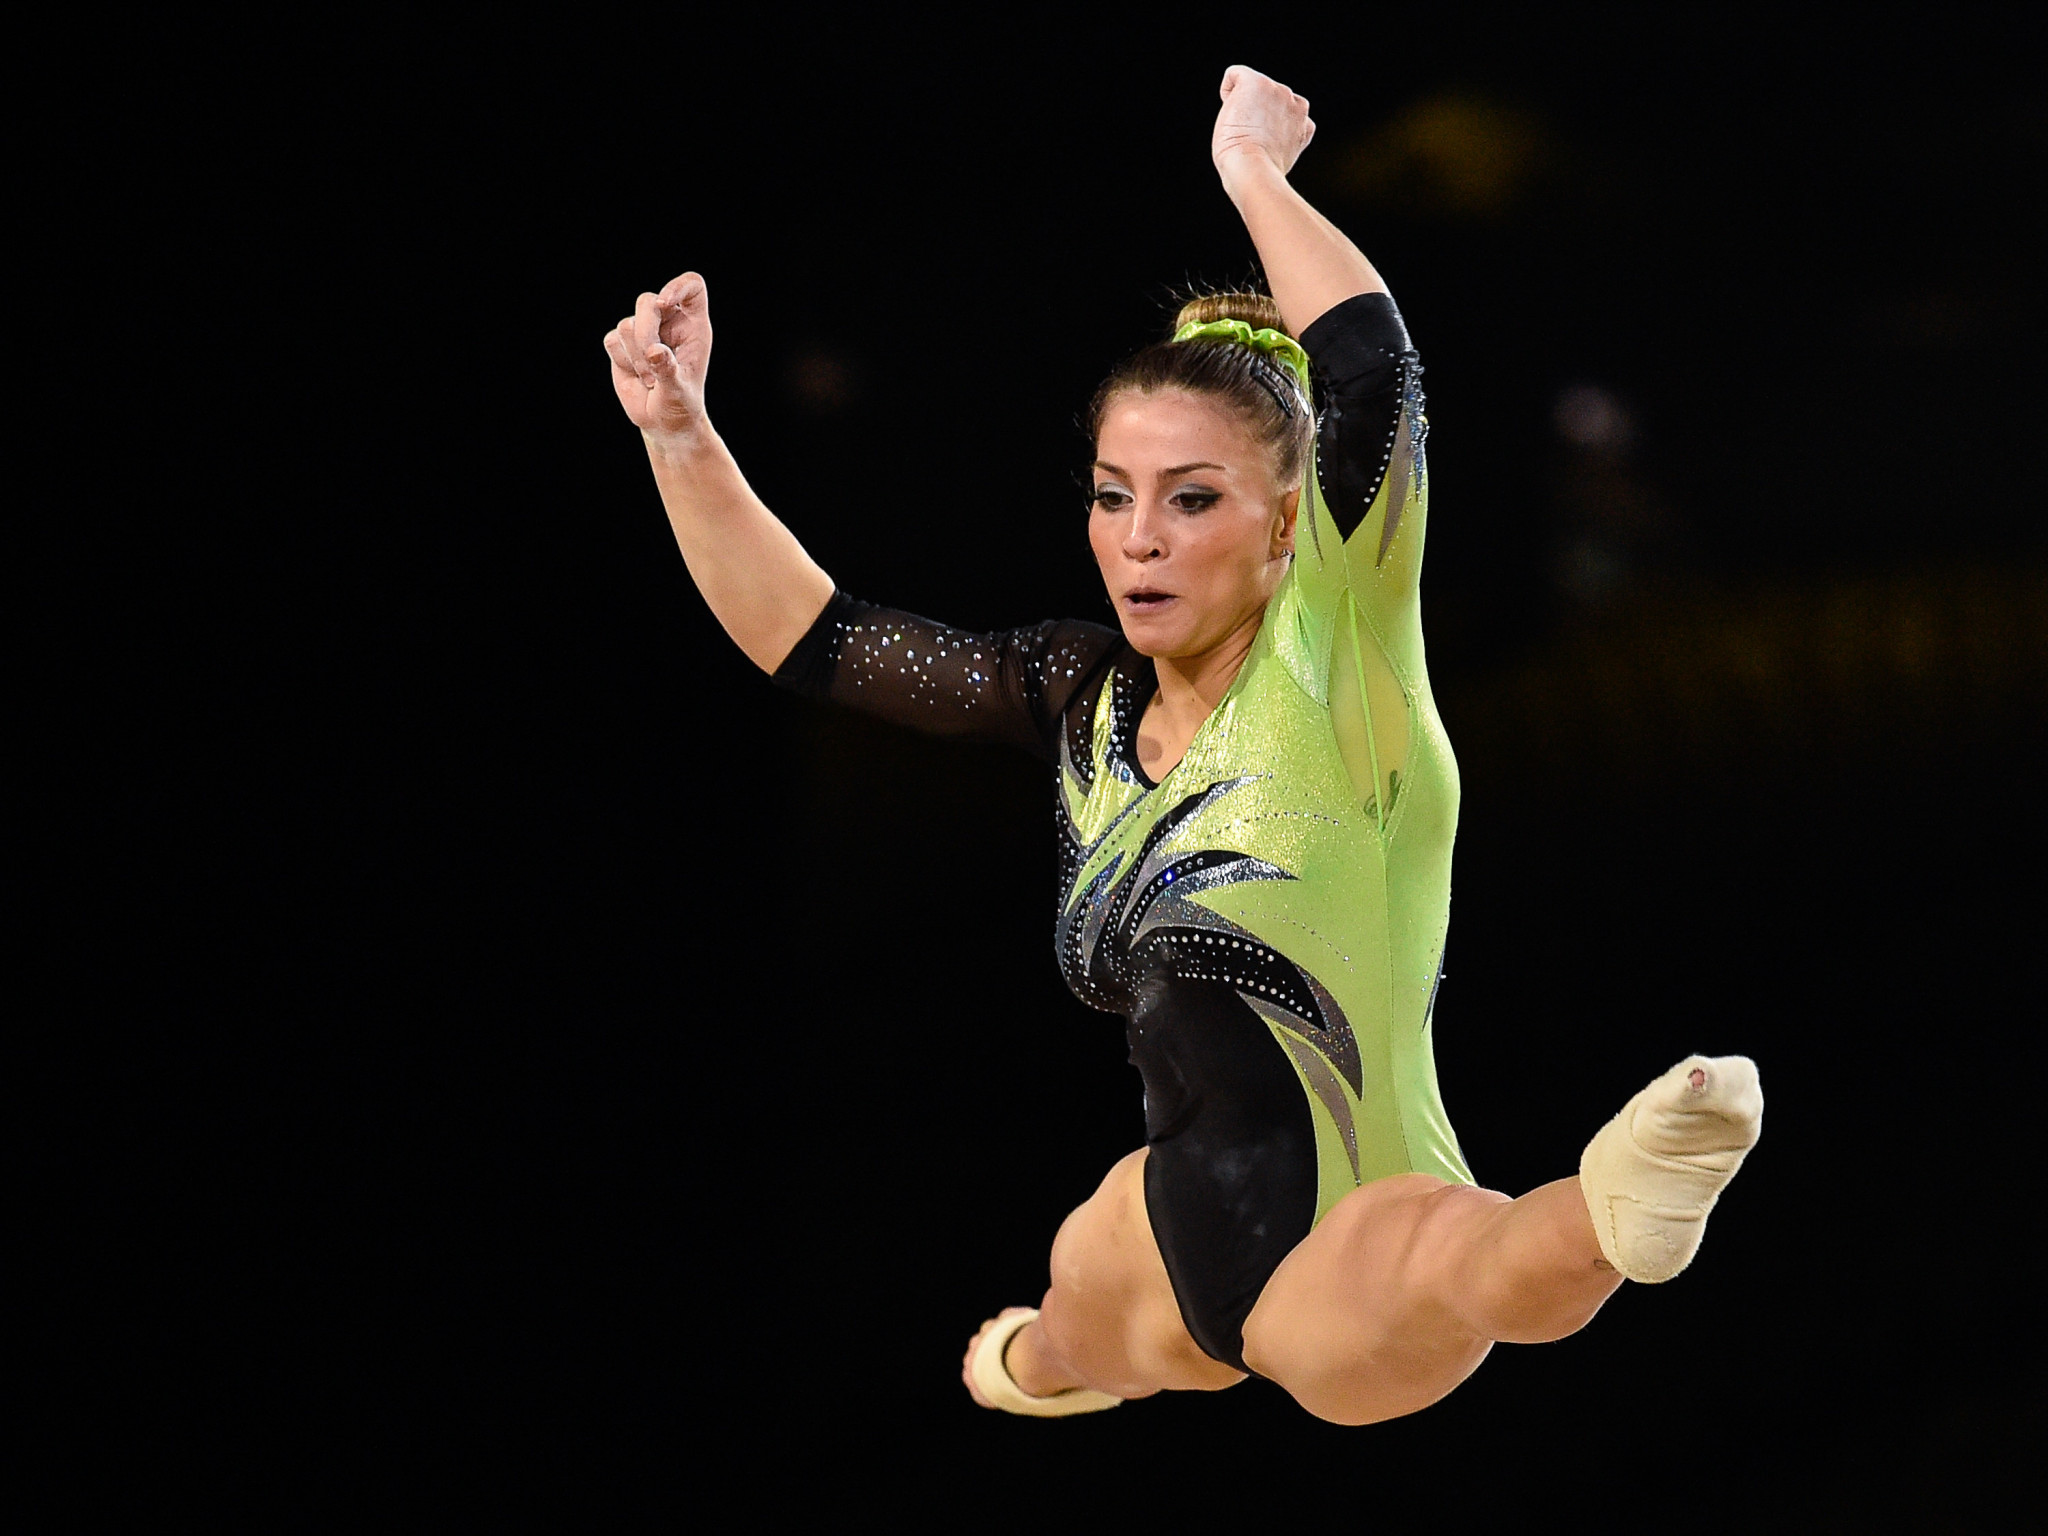 Italy's Lara Mori topped women's floor qualifying at the FIG Individual Apparatus World Cup in Baku ©Getty Images